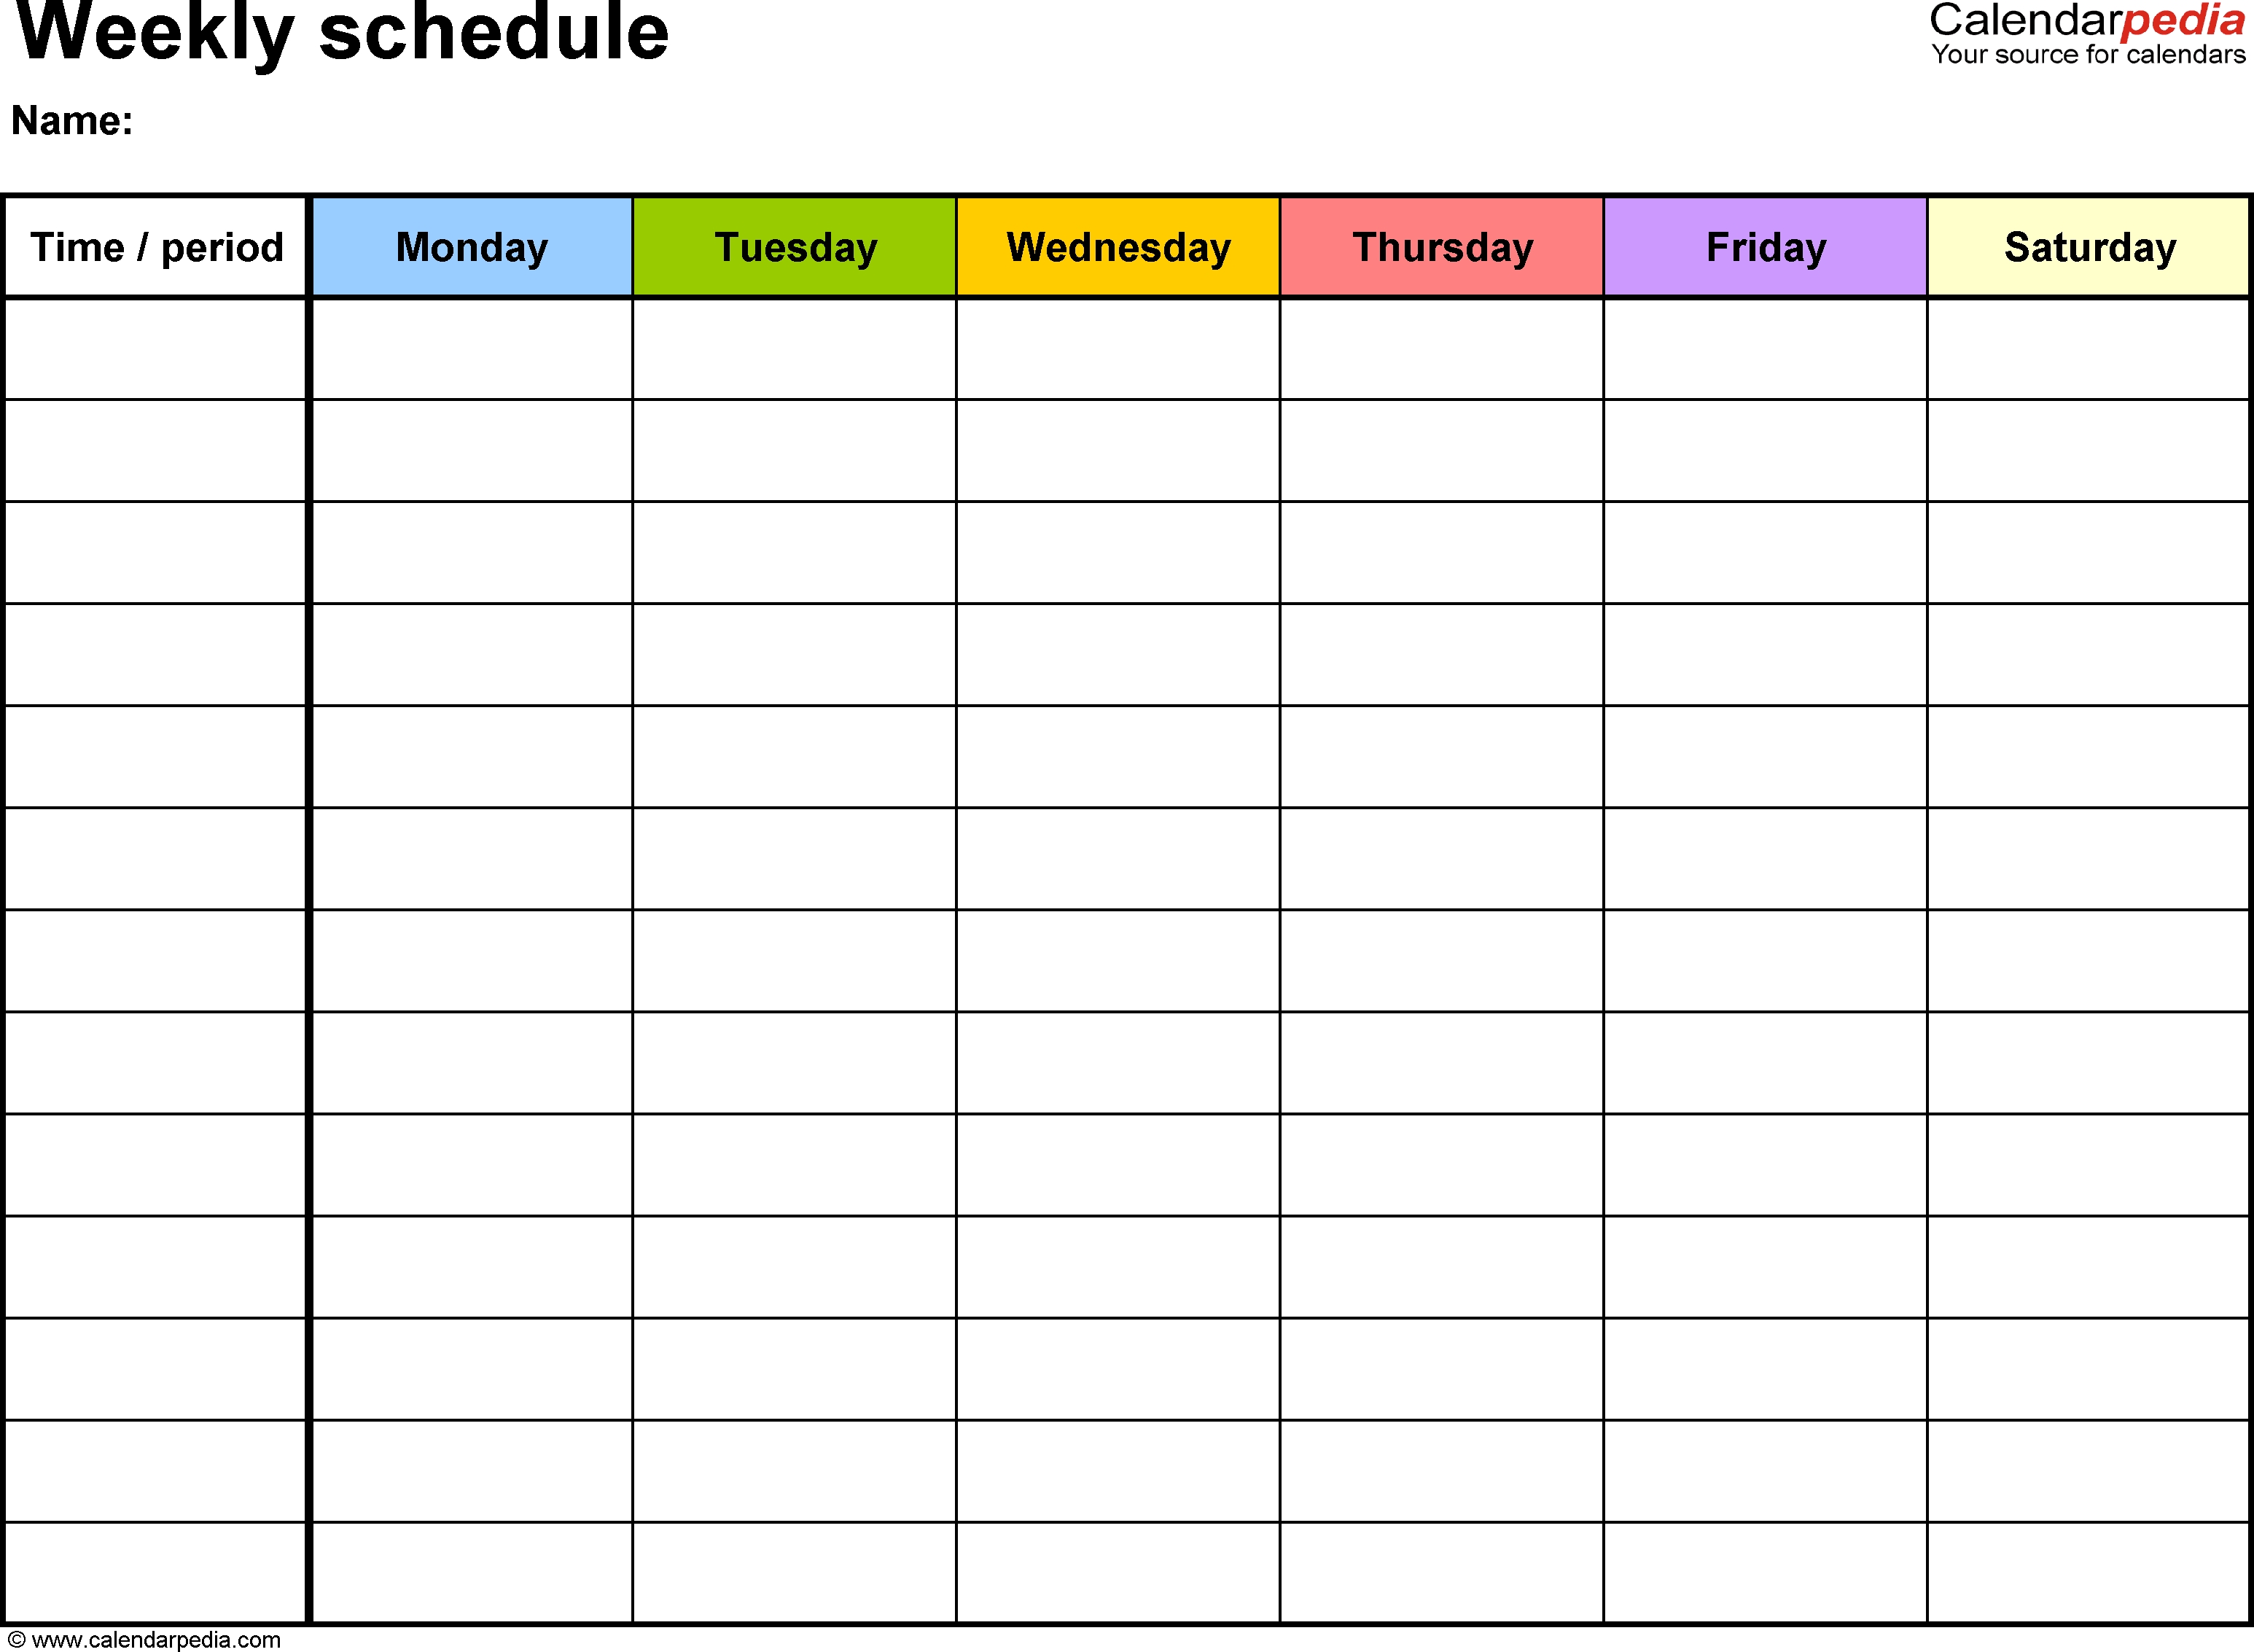 Free Weekly Schedule Templates For Word - 18 Templates-Six Week Blank Calendar Template